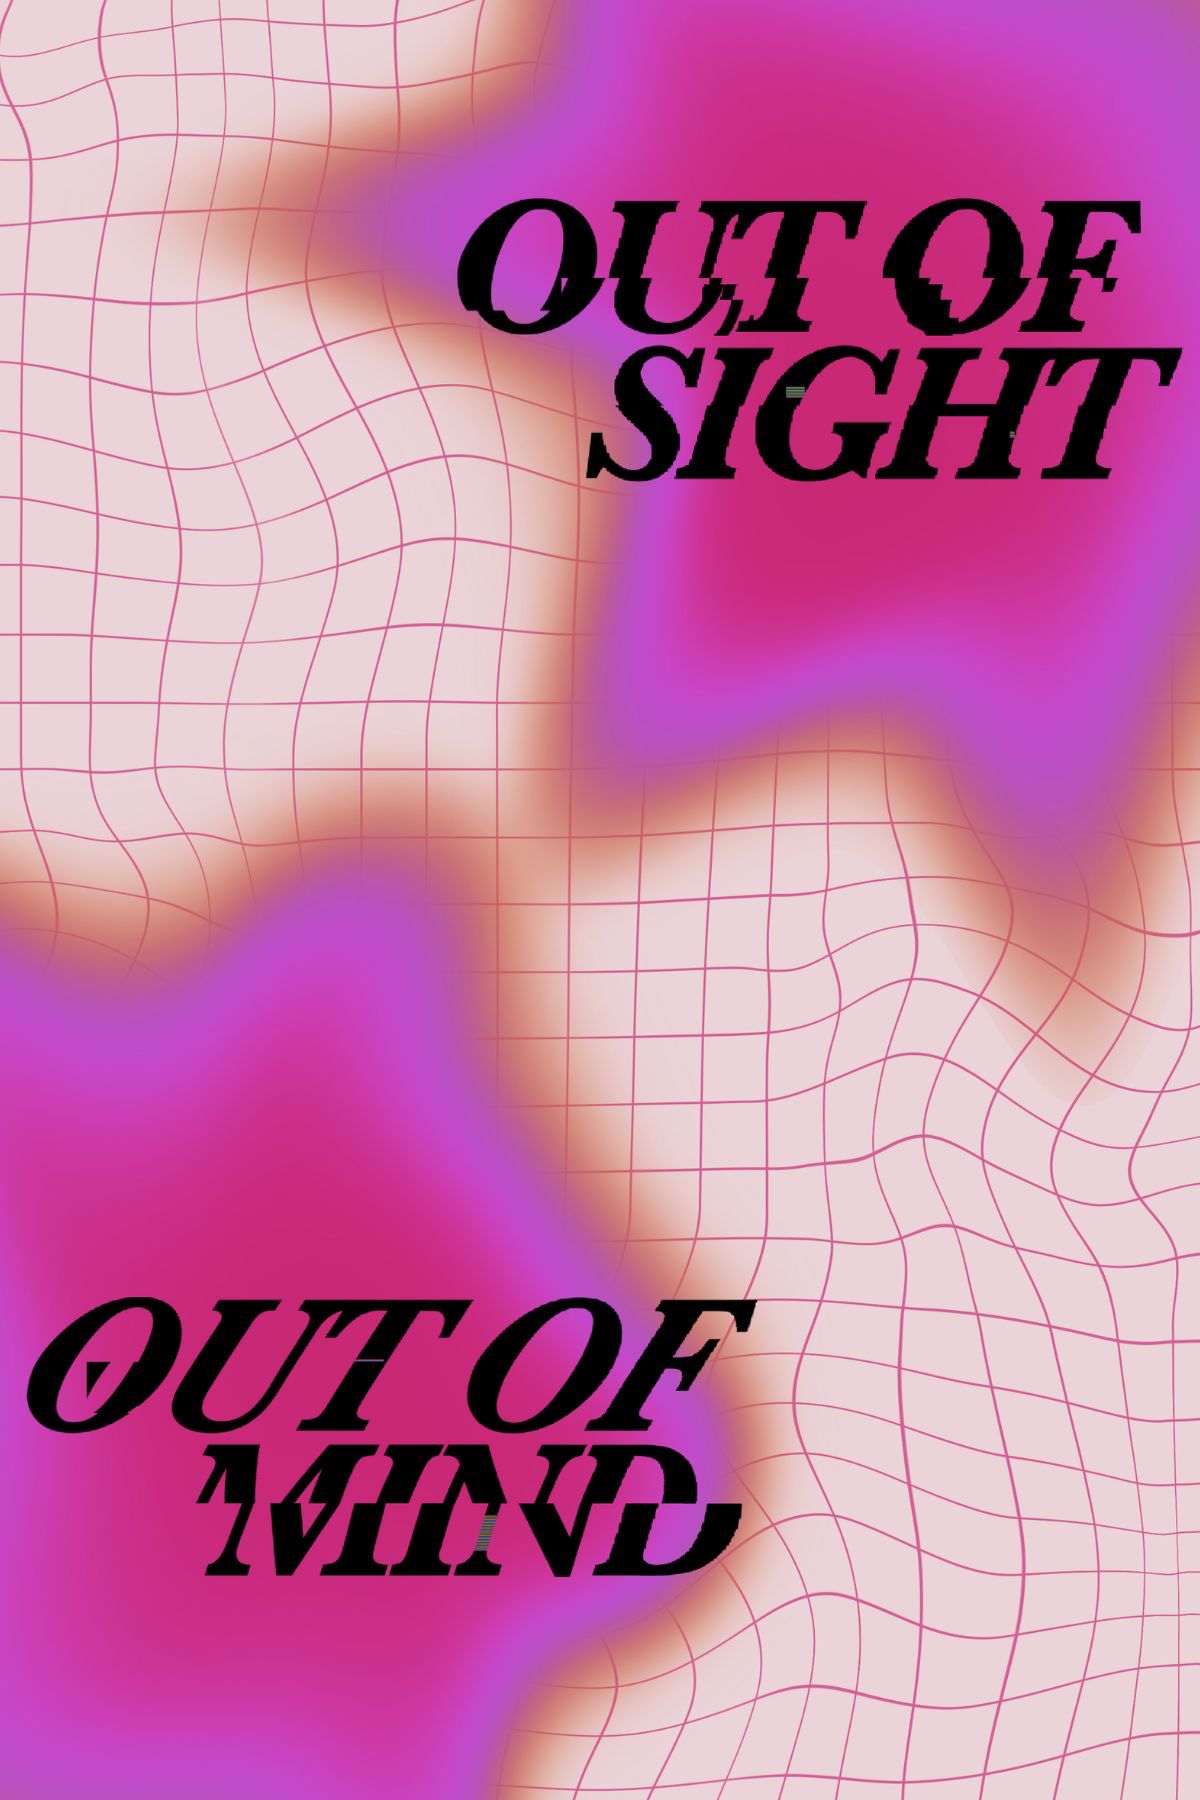 Out of sight print